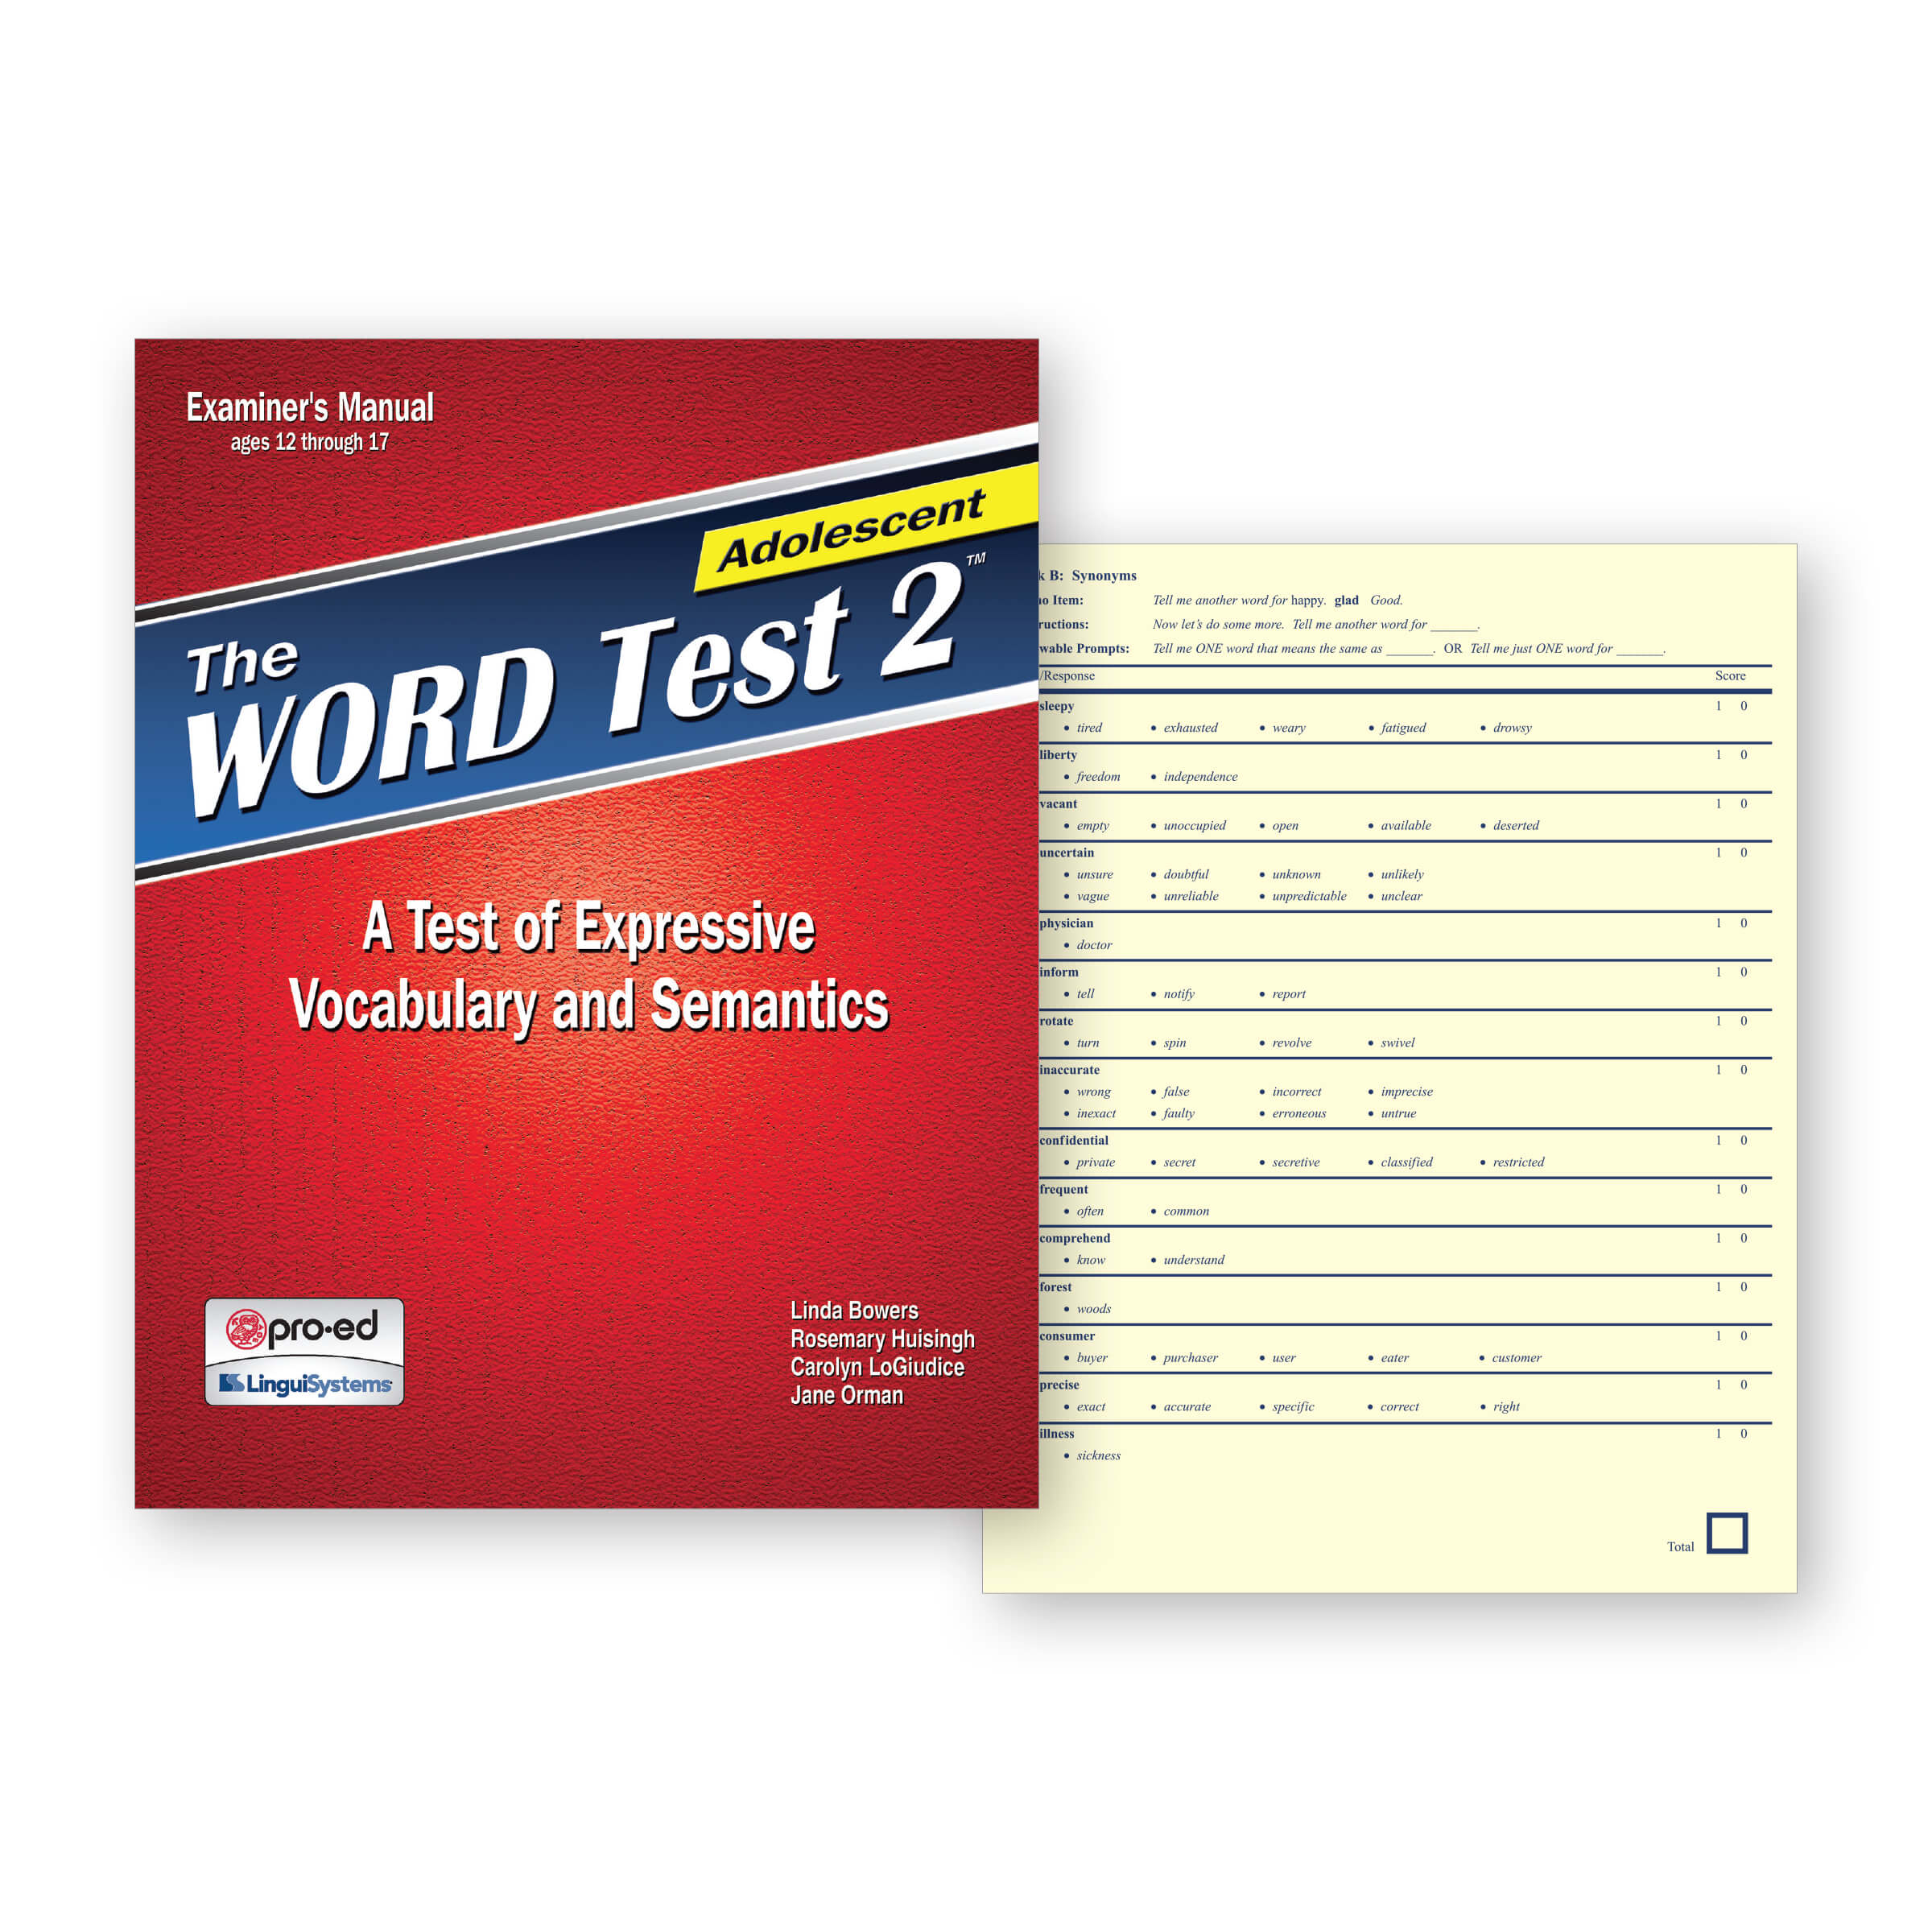 The WORD Test 2-Adolescent - 